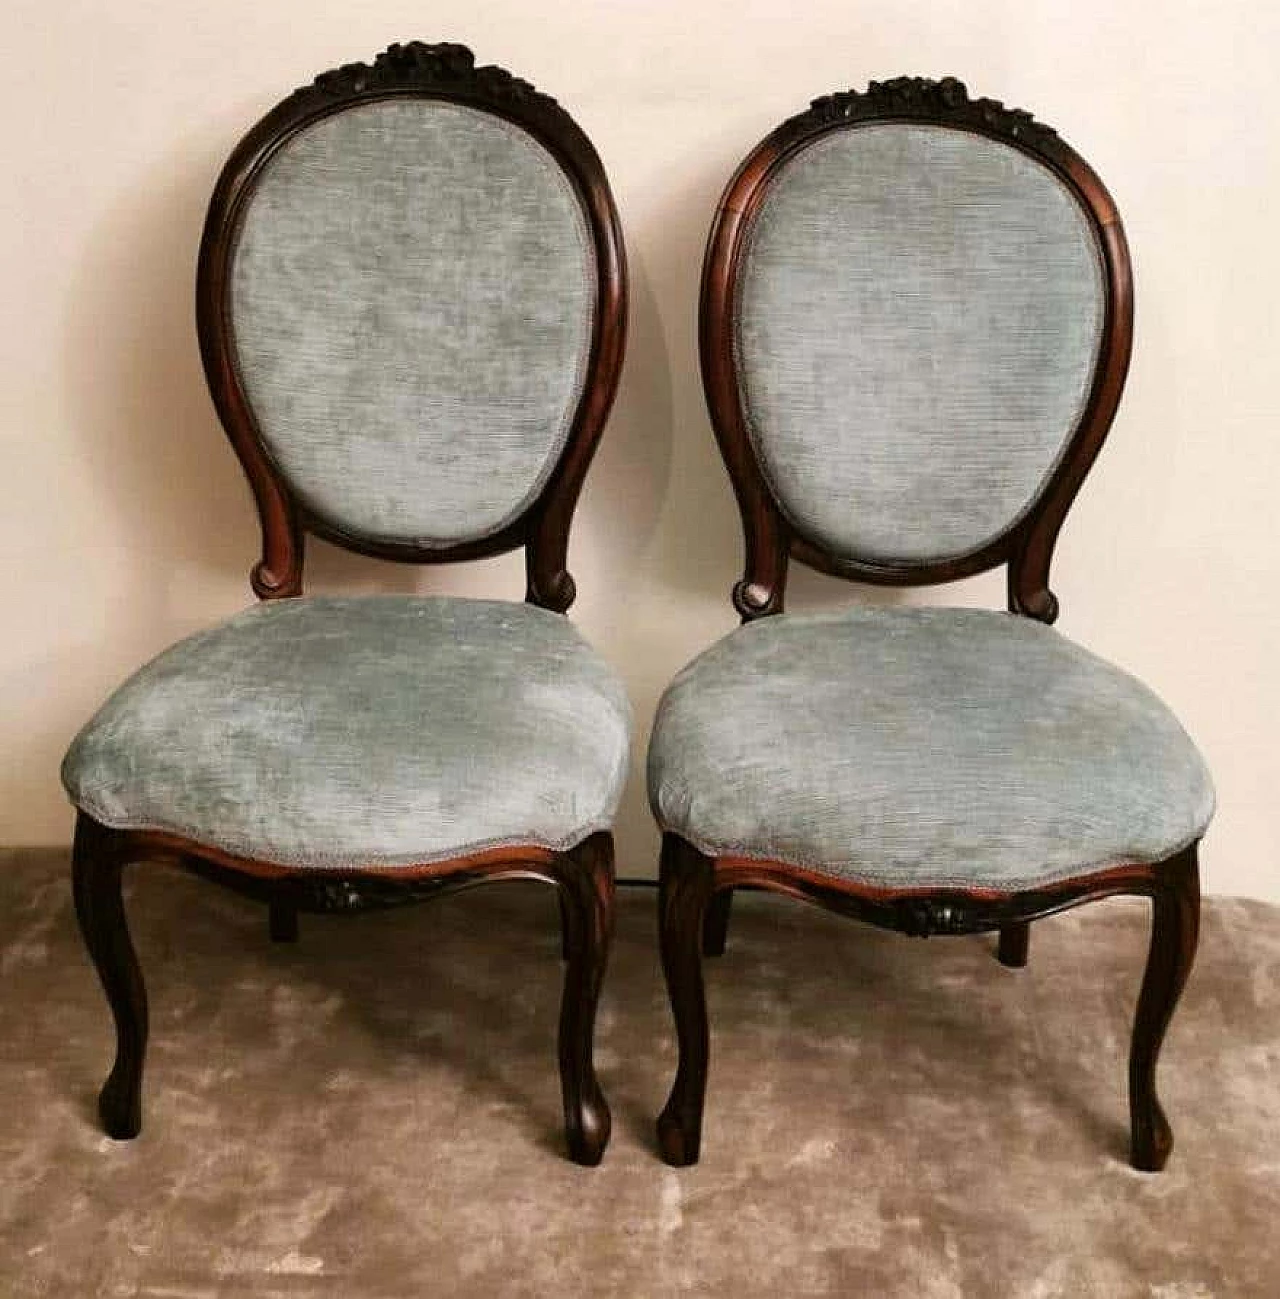 Pair of Napoleon III bedroom chairs in carved mahogany, 19th century 1188978